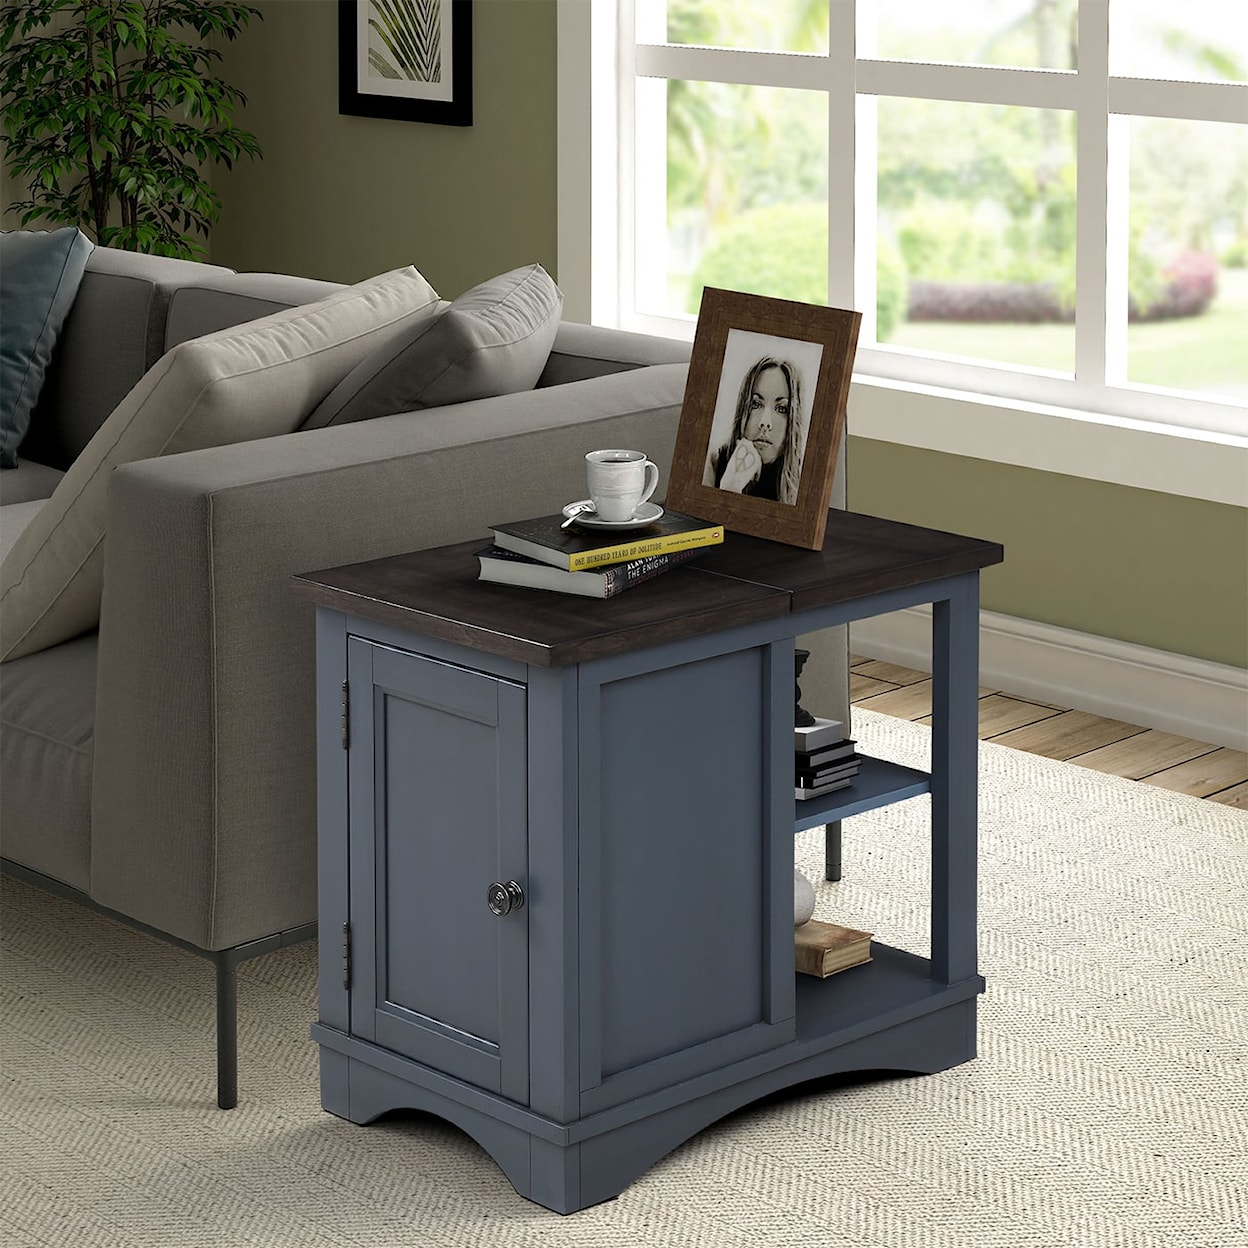 Paramount Furniture Americana Modern Chairside Table